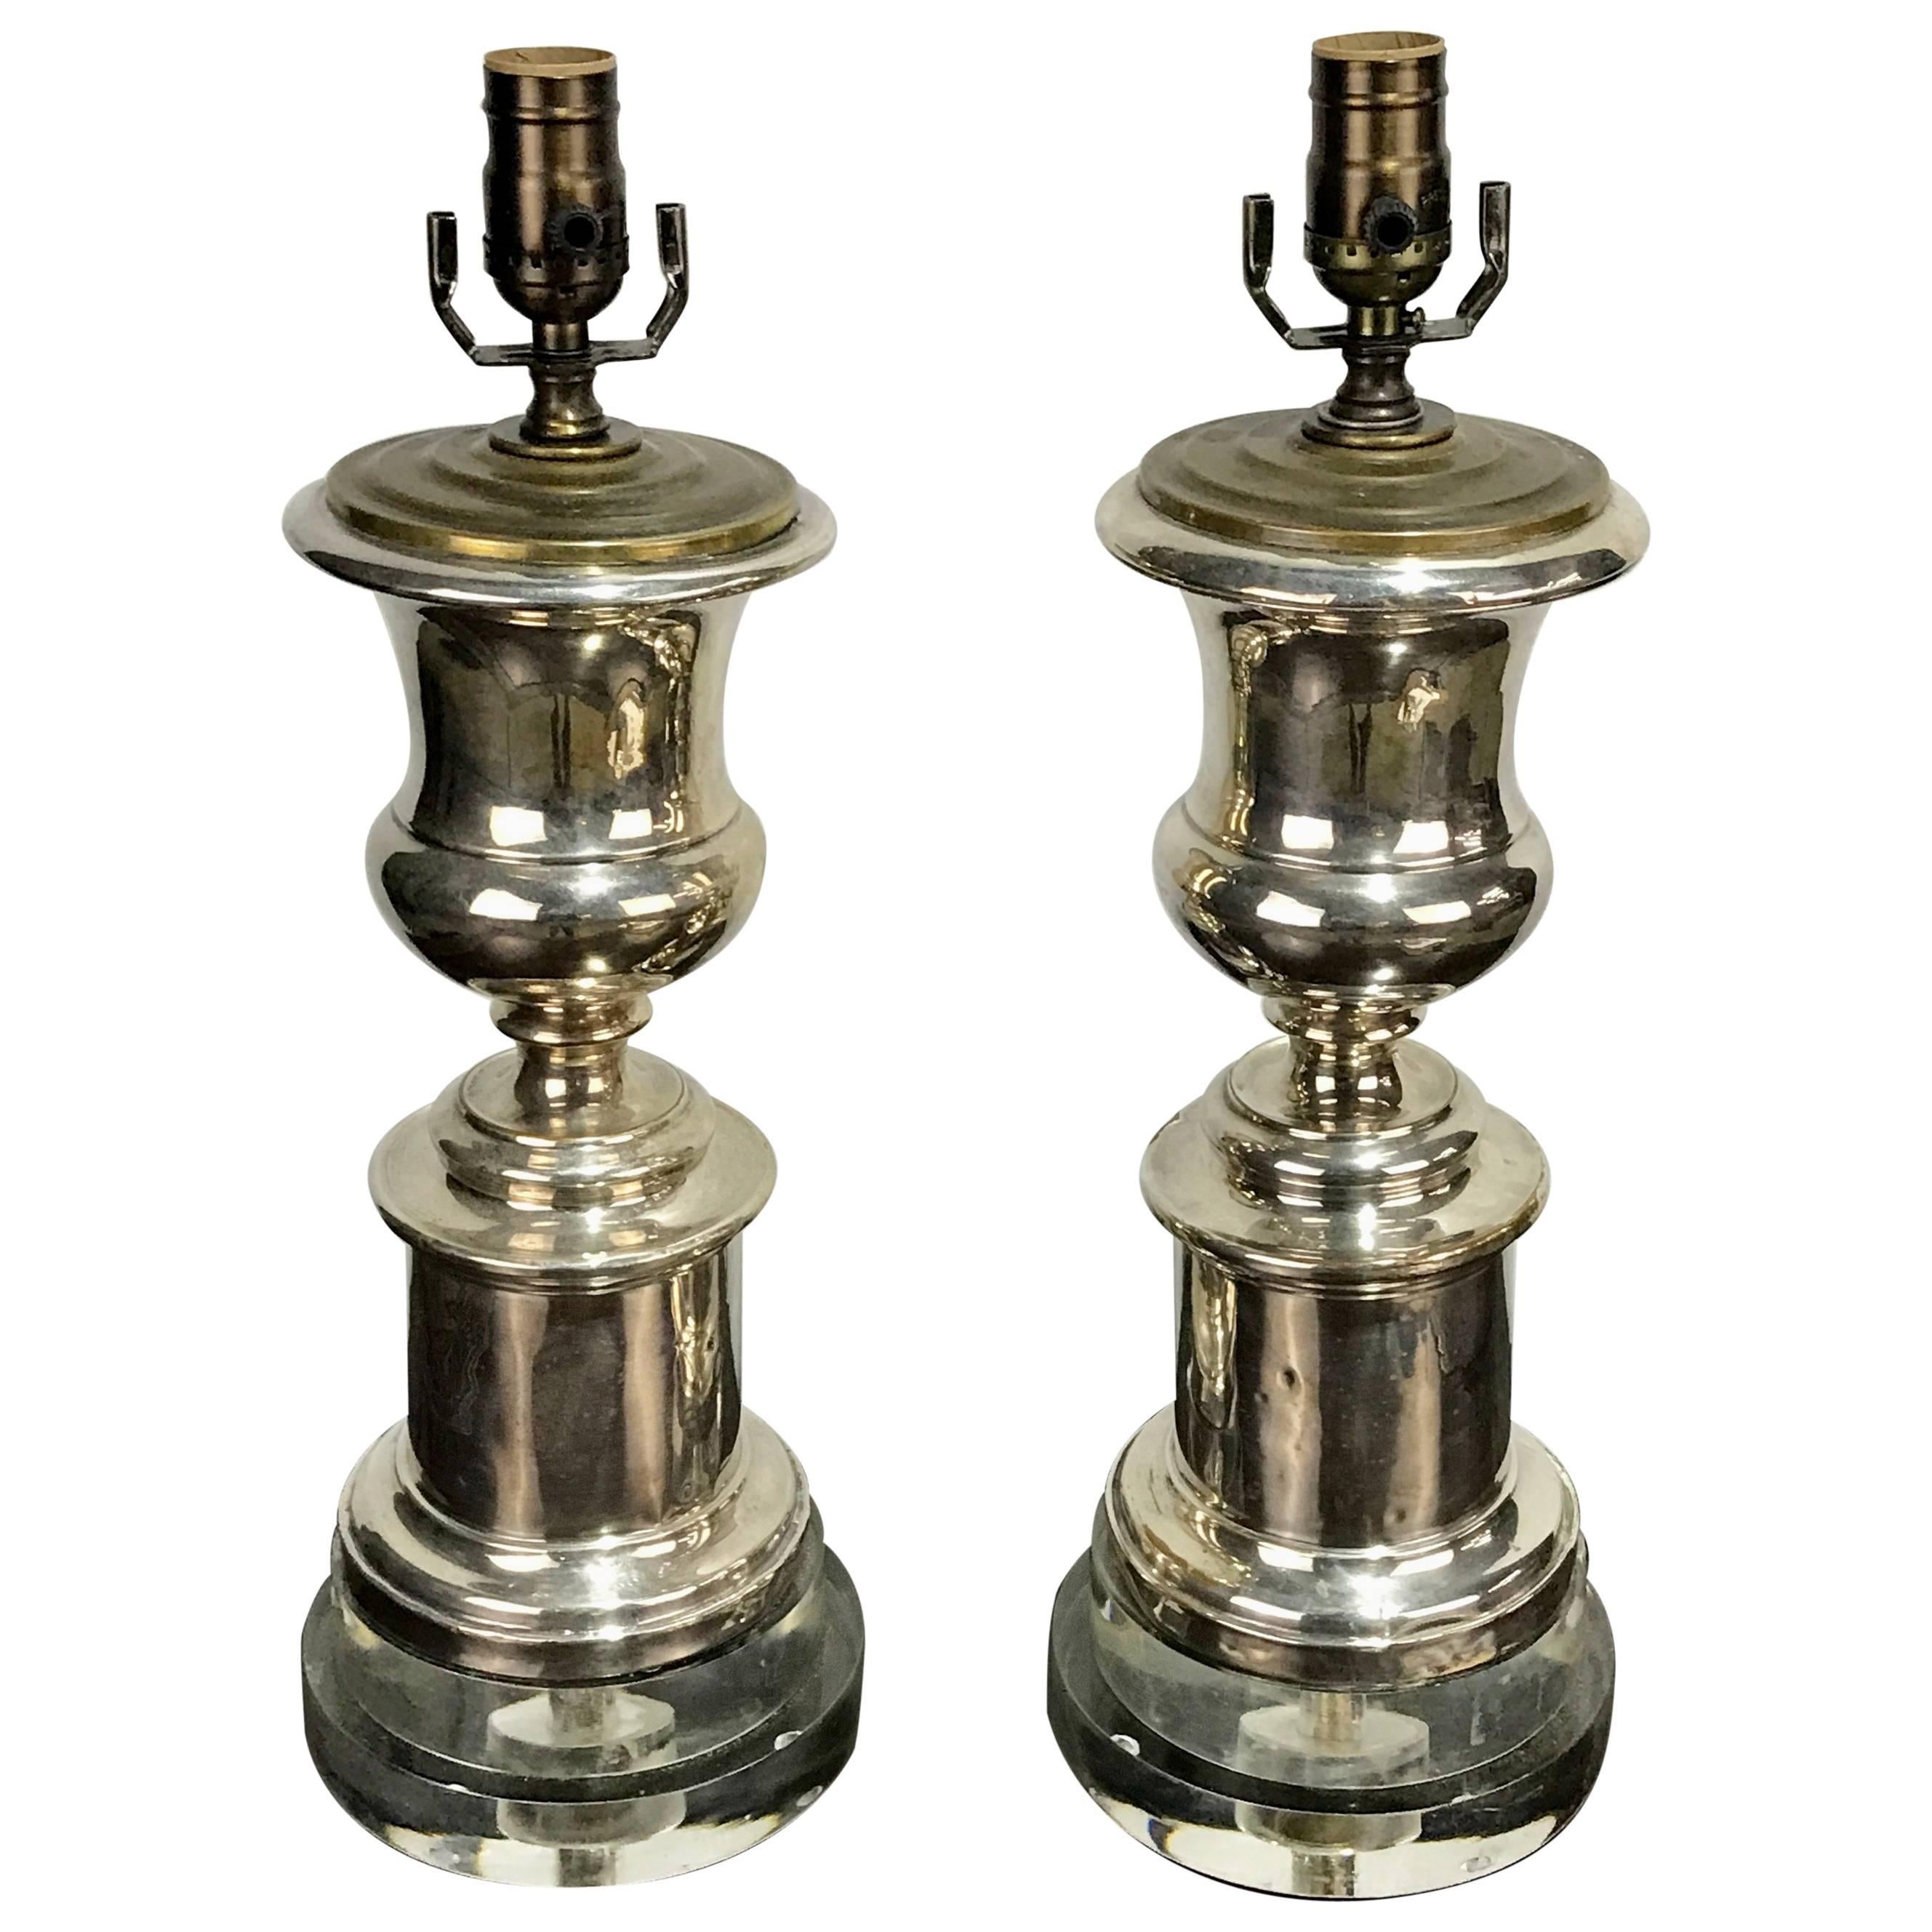 Pair of English Regency Silver Plated Urns Now as Lamps